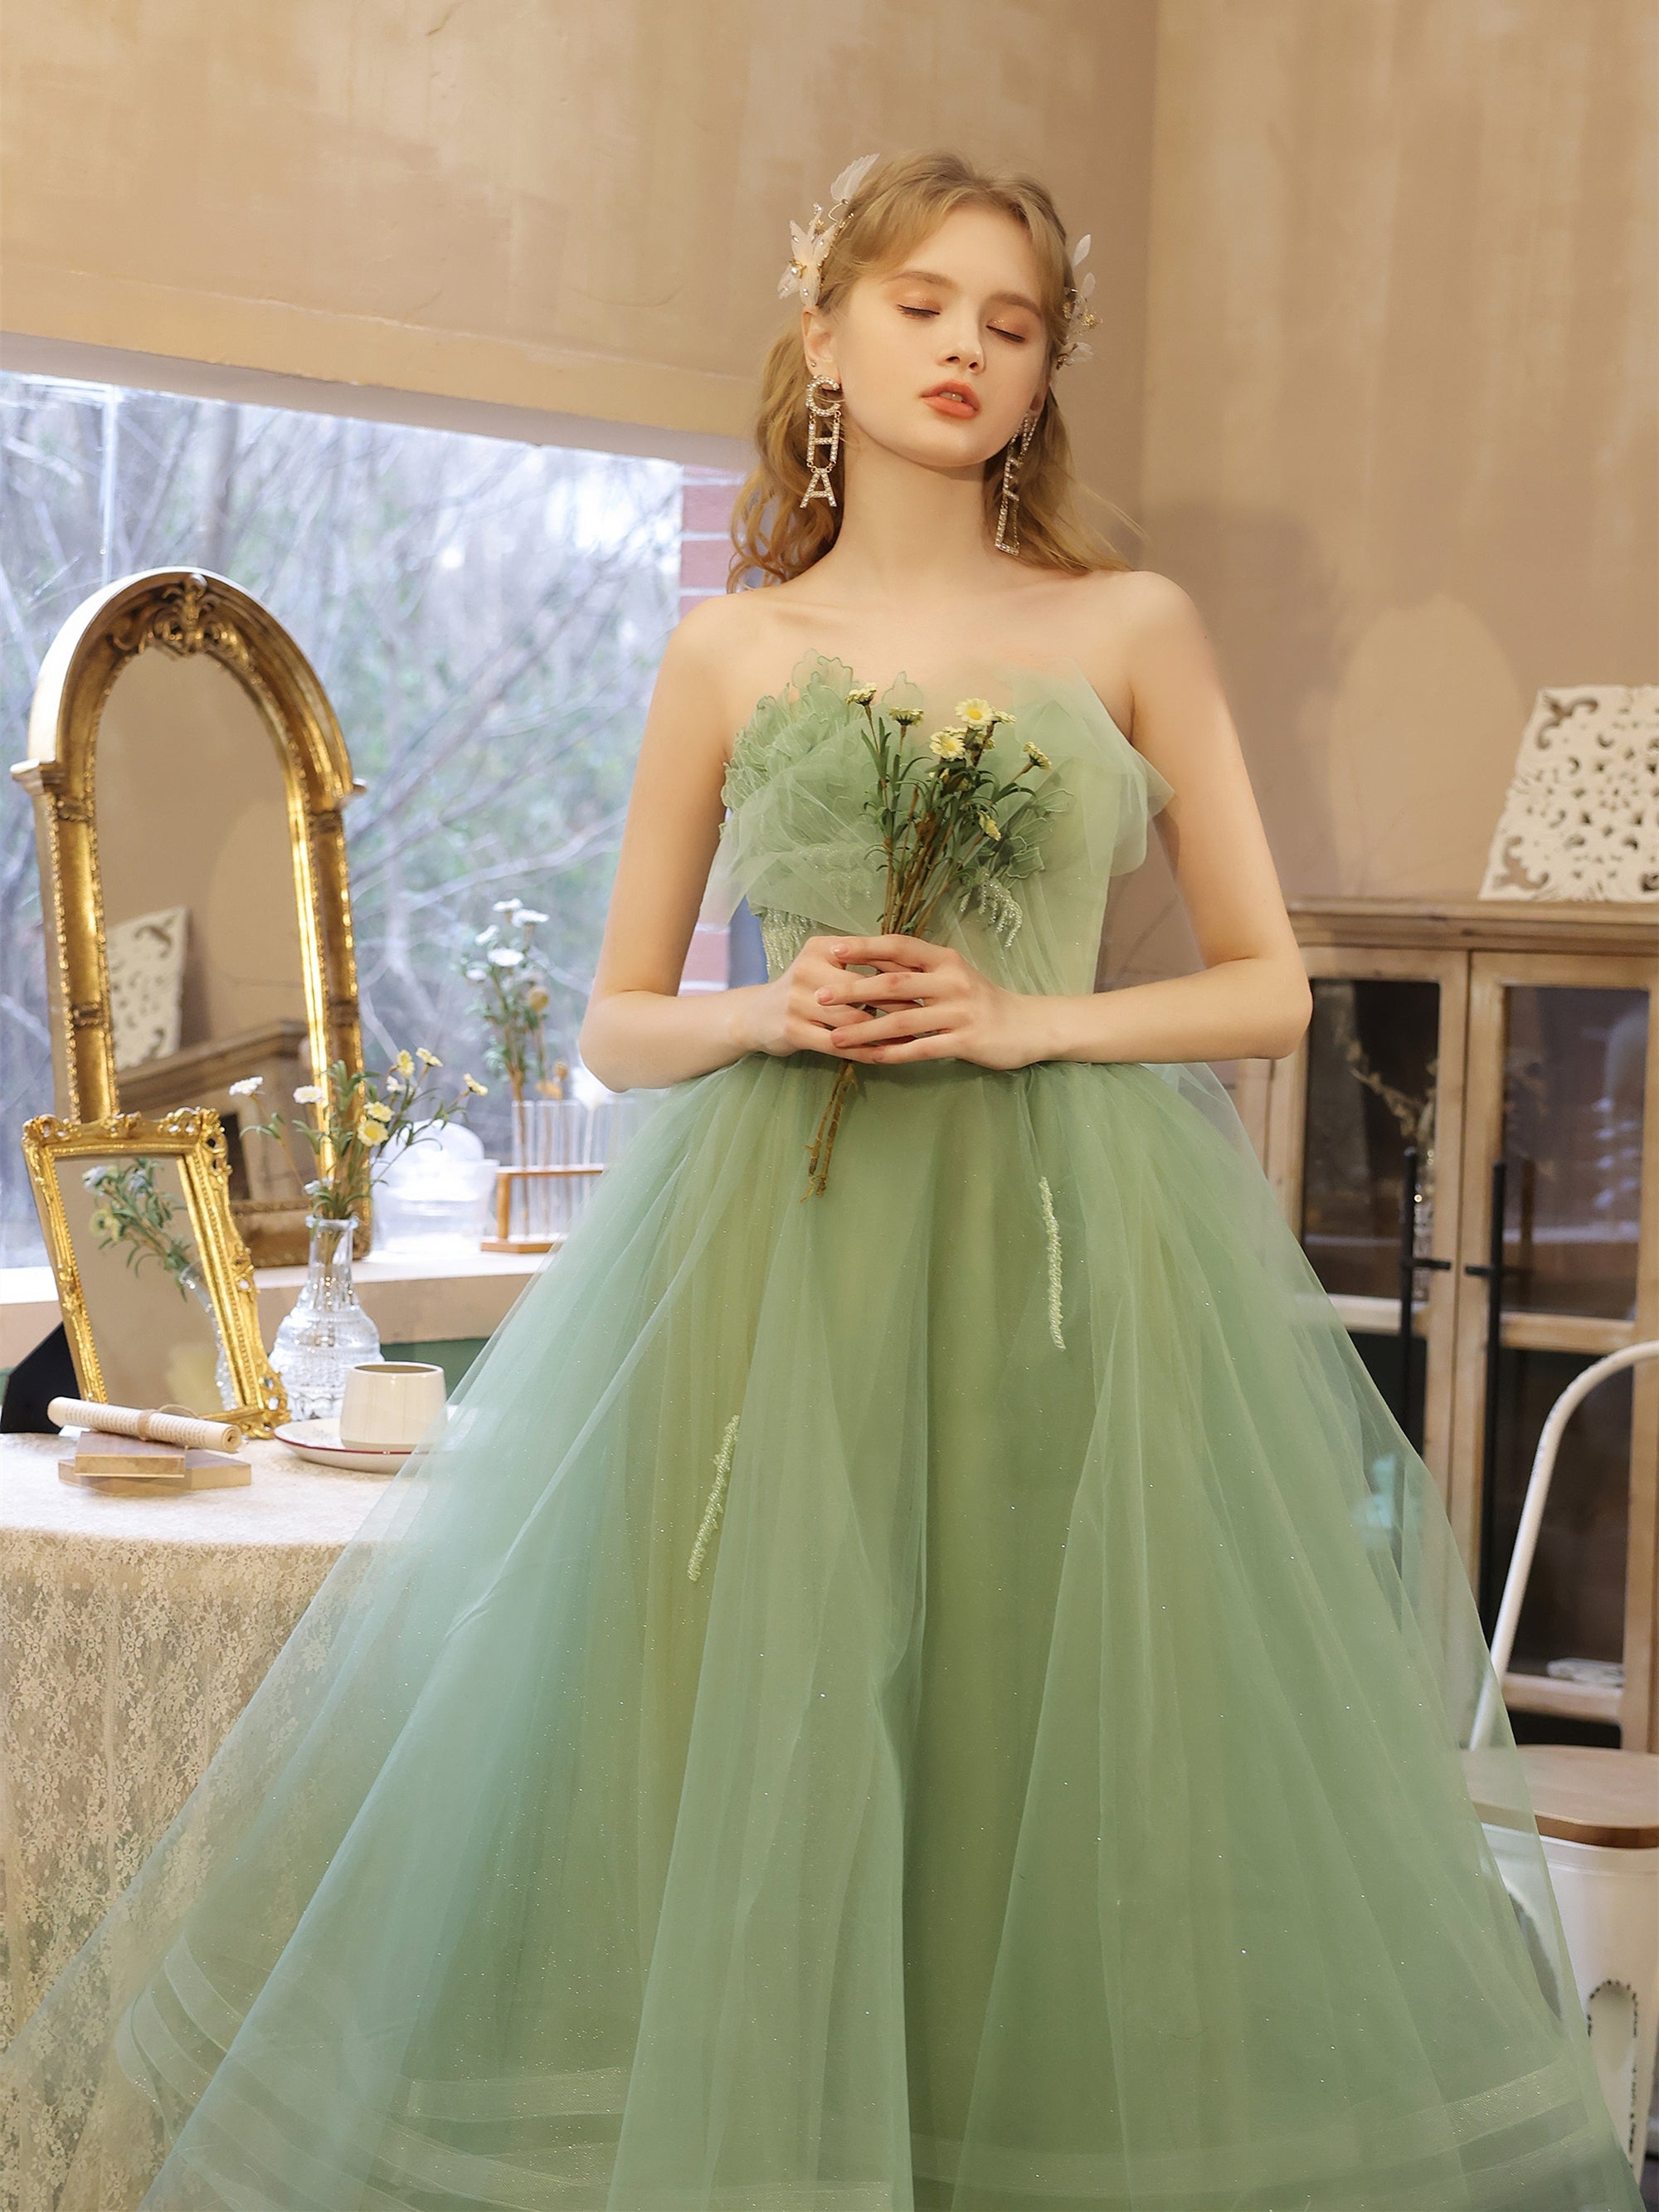  LINLSSANJC Plus Size Sage Green Tulle Prom Dresses for